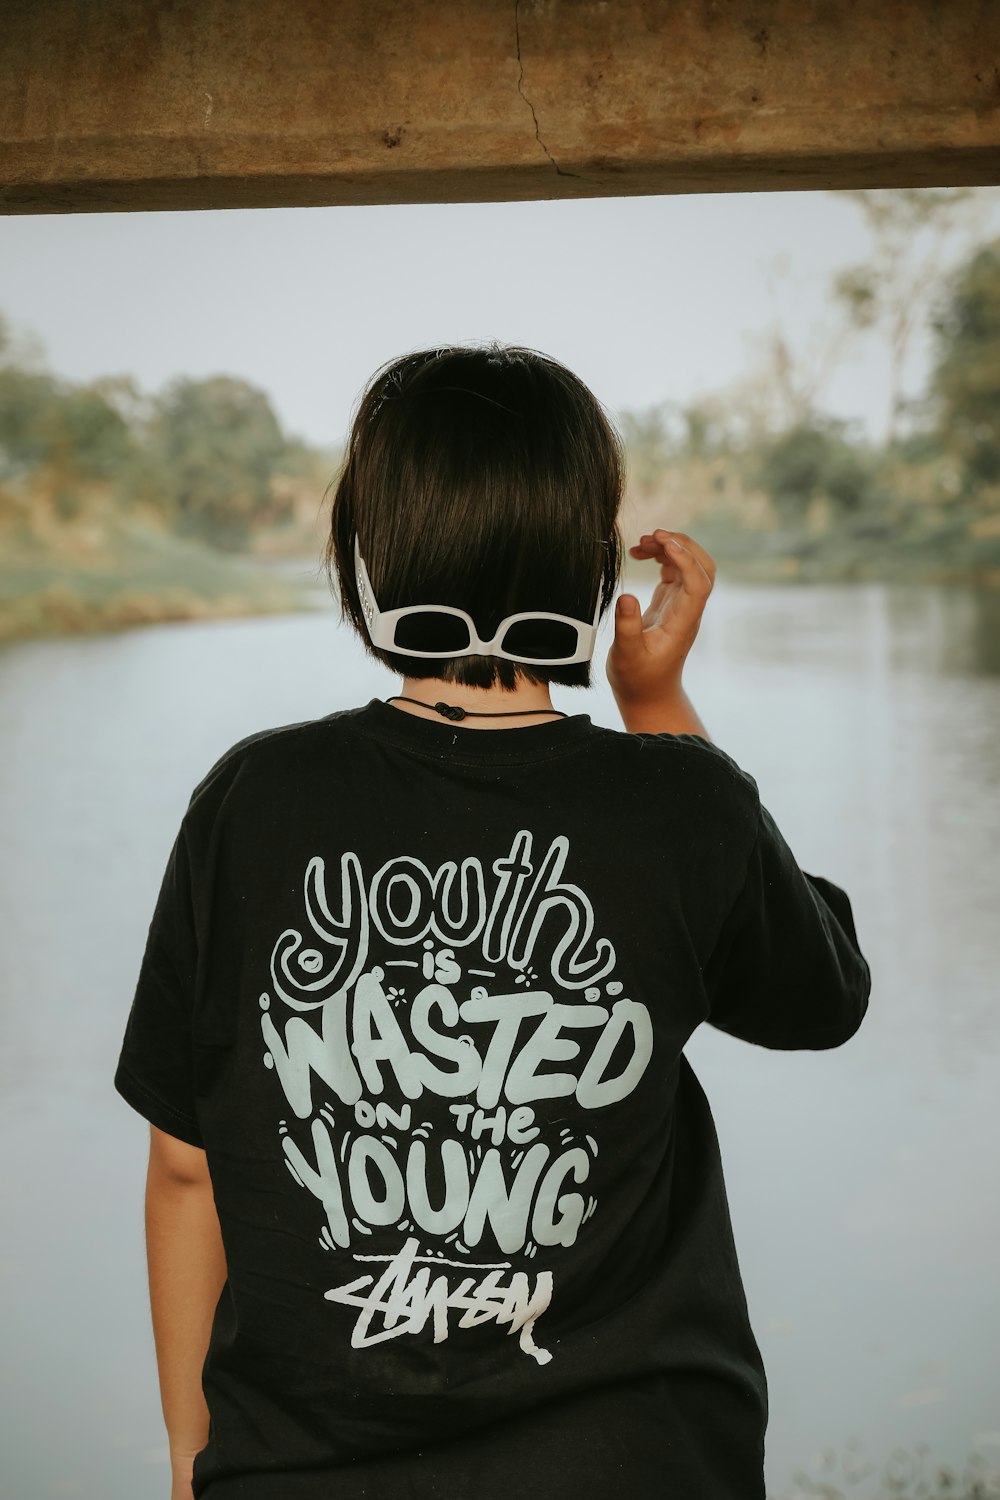 a young boy wearing a t - shirt that says youth is wasted young